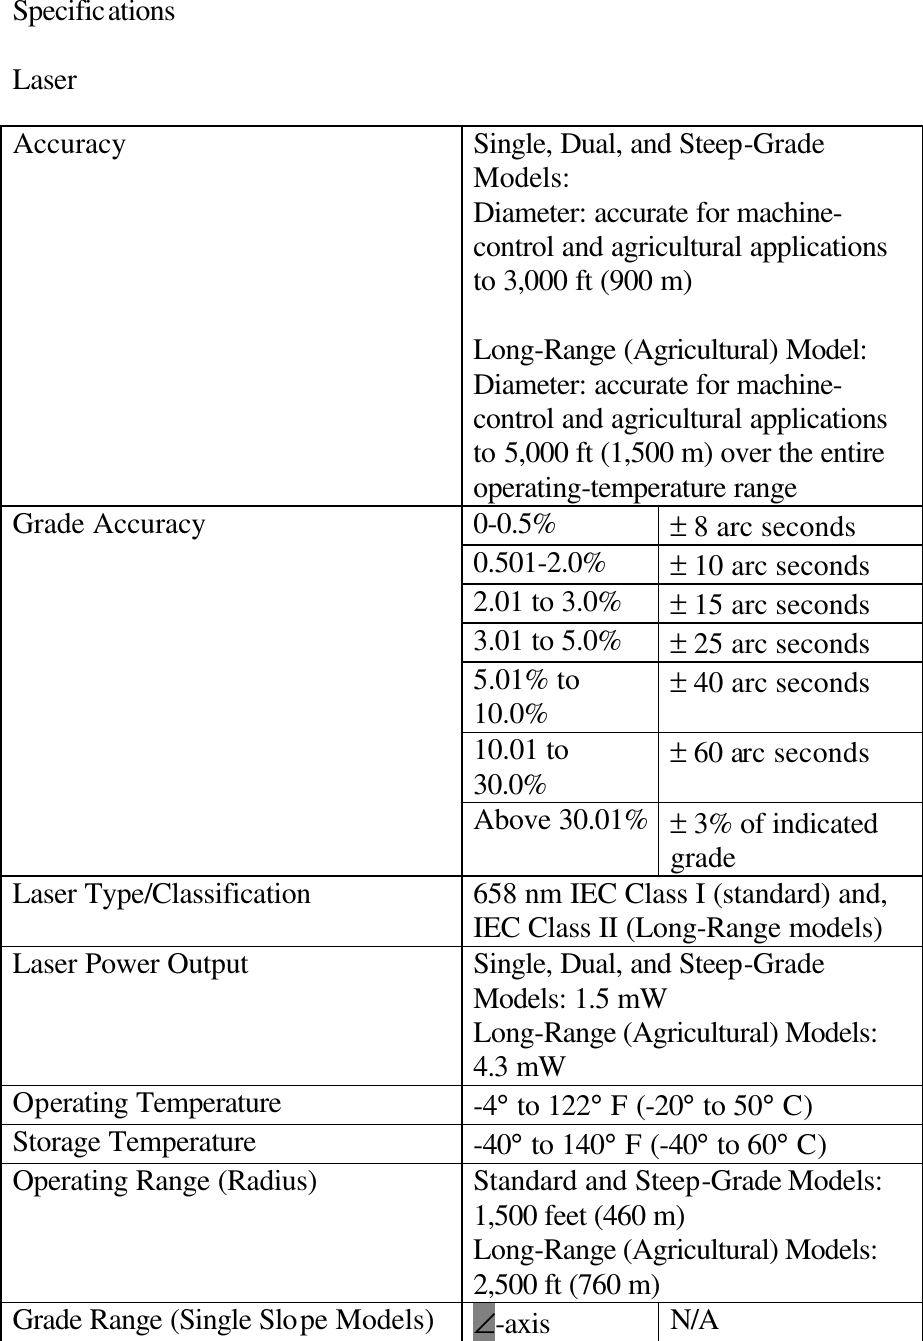 Specifications  Laser  Accuracy Single, Dual, and Steep-Grade Models: Diameter: accurate for machine-control and agricultural applications to 3,000 ft (900 m)  Long-Range (Agricultural) Model: Diameter: accurate for machine-control and agricultural applications to 5,000 ft (1,500 m) over the entire operating-temperature range 0-0.5% ± 8 arc seconds 0.501-2.0% ± 10 arc seconds 2.01 to 3.0% ± 15 arc seconds 3.01 to 5.0% ± 25 arc seconds 5.01% to 10.0%  ± 40 arc seconds  10.01 to 30.0% ± 60 arc seconds Grade Accuracy Above 30.01%  ± 3% of indicated grade Laser Type/Classification 658 nm IEC Class I (standard) and, IEC Class II (Long-Range models) Laser Power Output Single, Dual, and Steep-Grade Models: 1.5 mW Long-Range (Agricultural) Models: 4.3 mW Operating Temperature -4° to 122° F (-20° to 50° C) Storage Temperature -40° to 140° F (-40° to 60° C) Operating Range (Radius) Standard and Steep-Grade Models: 1,500 feet (460 m)  Long-Range (Agricultural) Models: 2,500 ft (760 m)  Grade Range (Single Slope Models) ∠-axis  N/A 